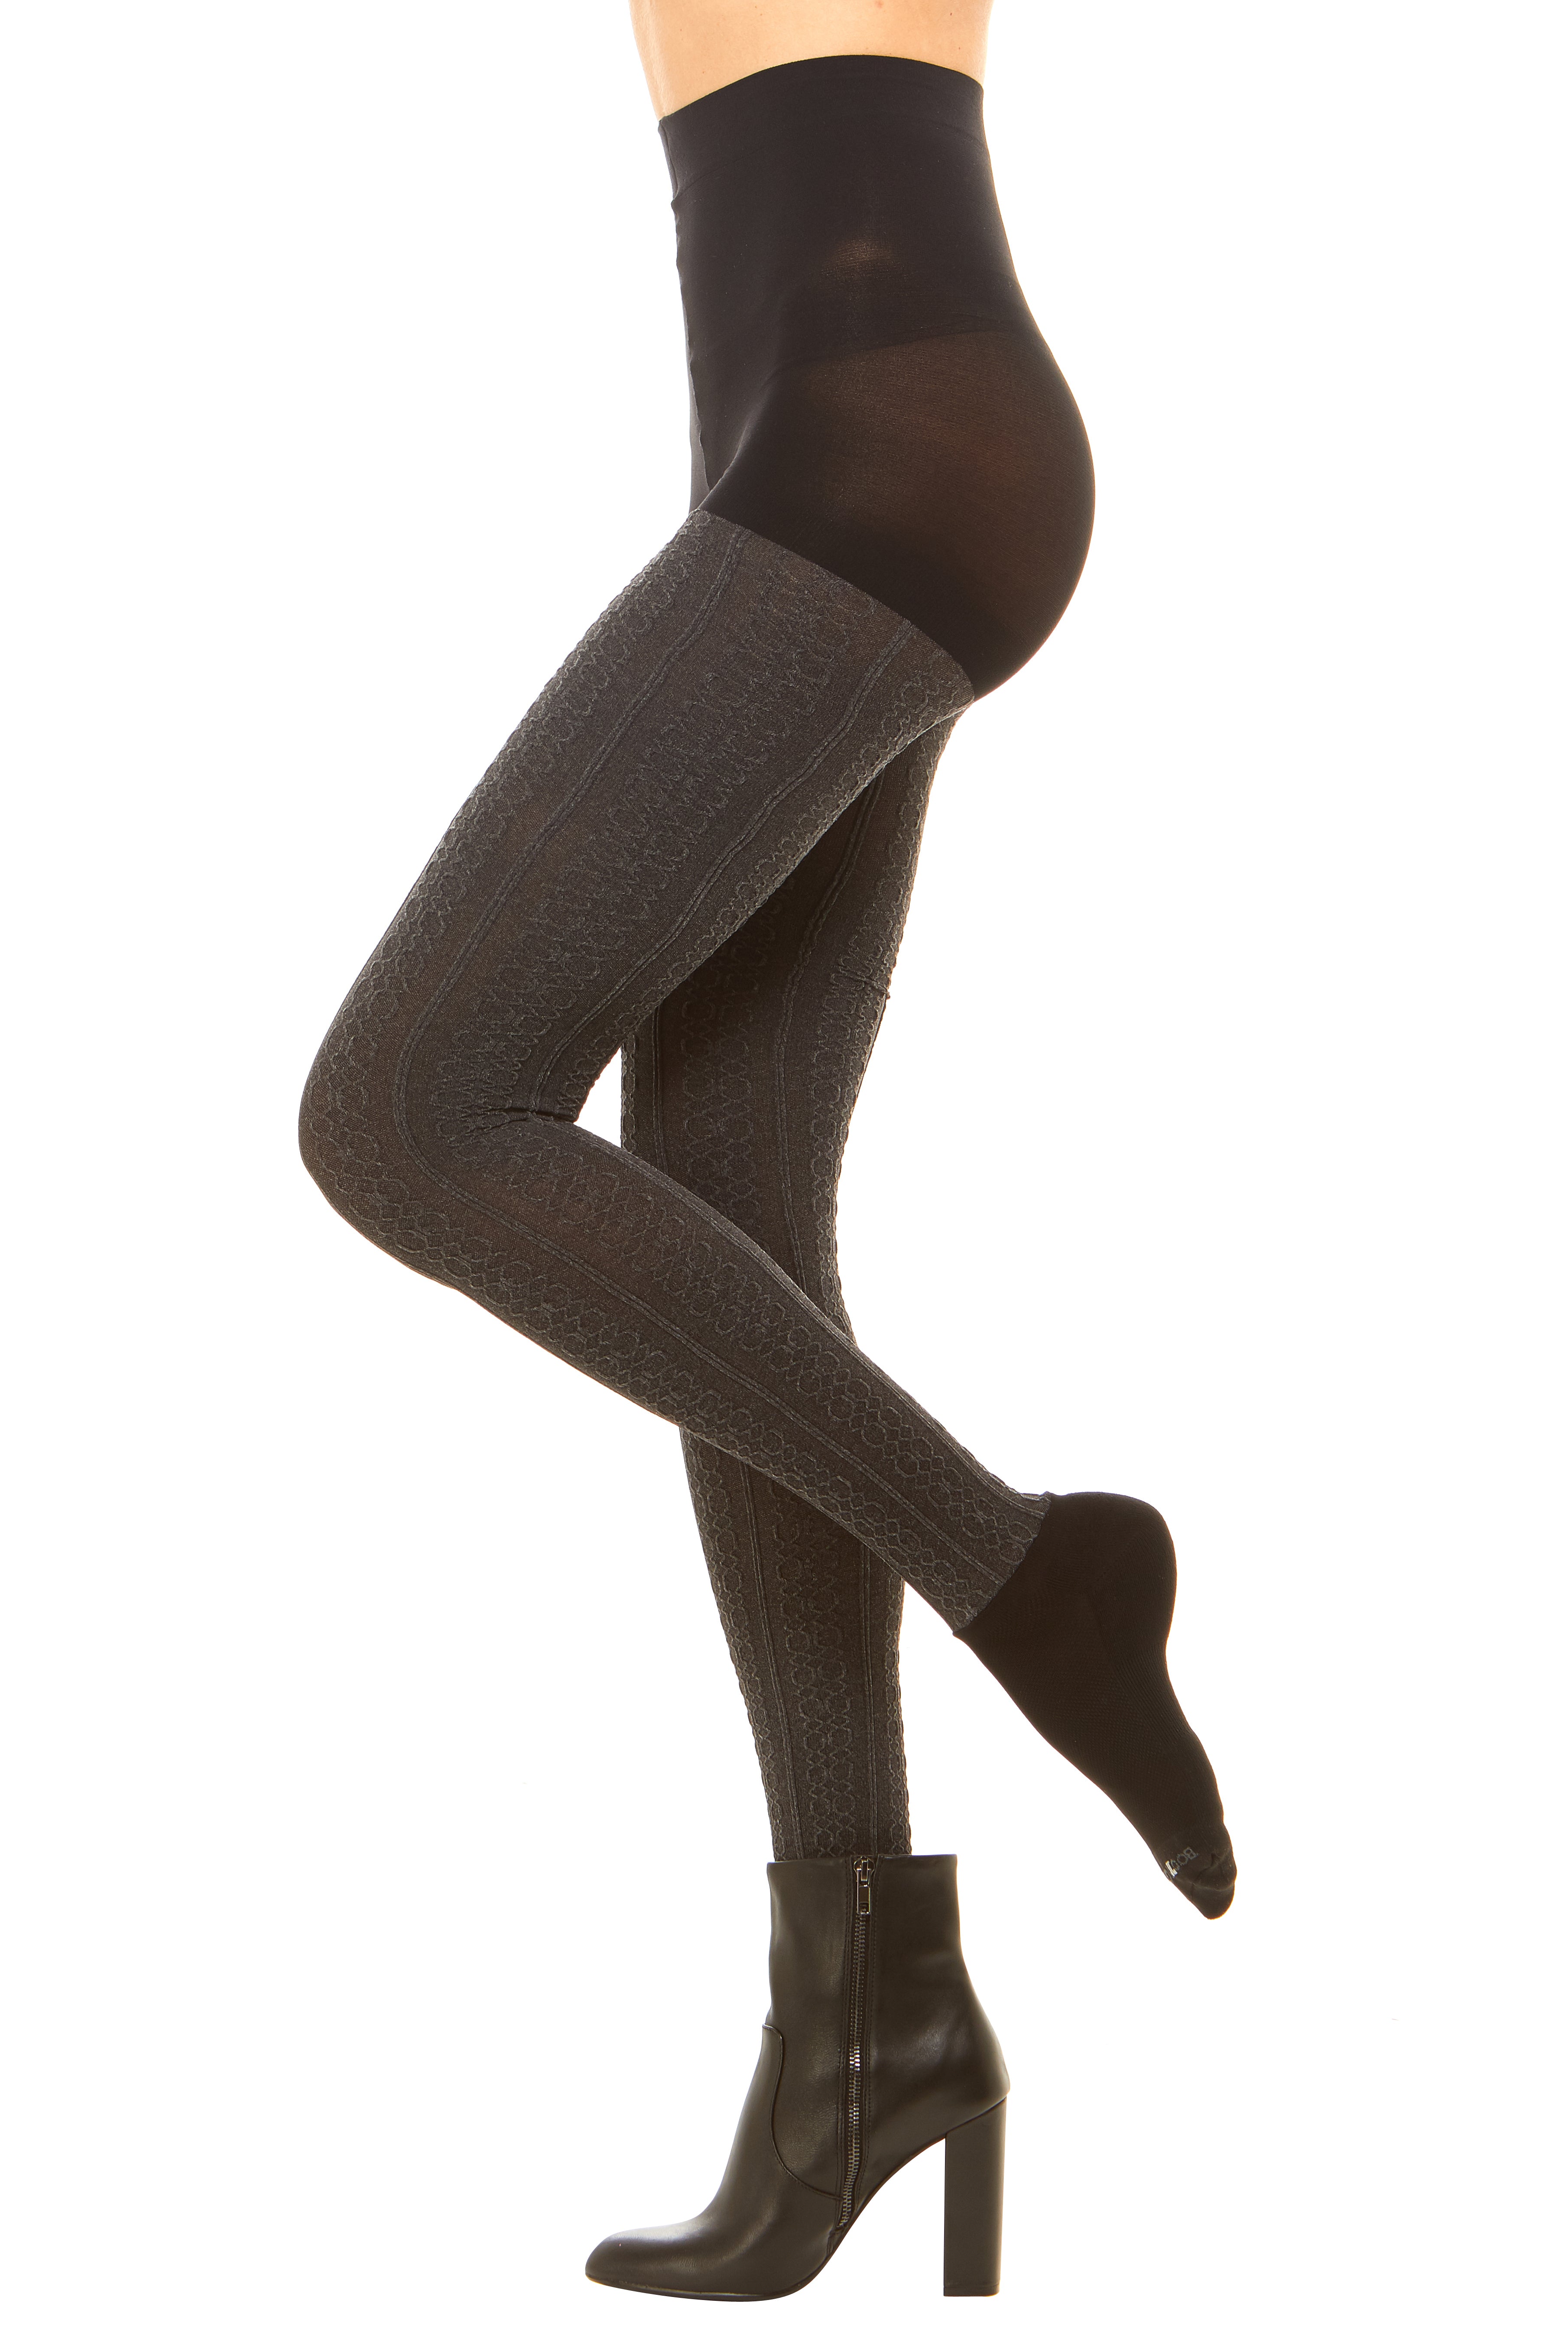 Women's Black Cable Knit Tights